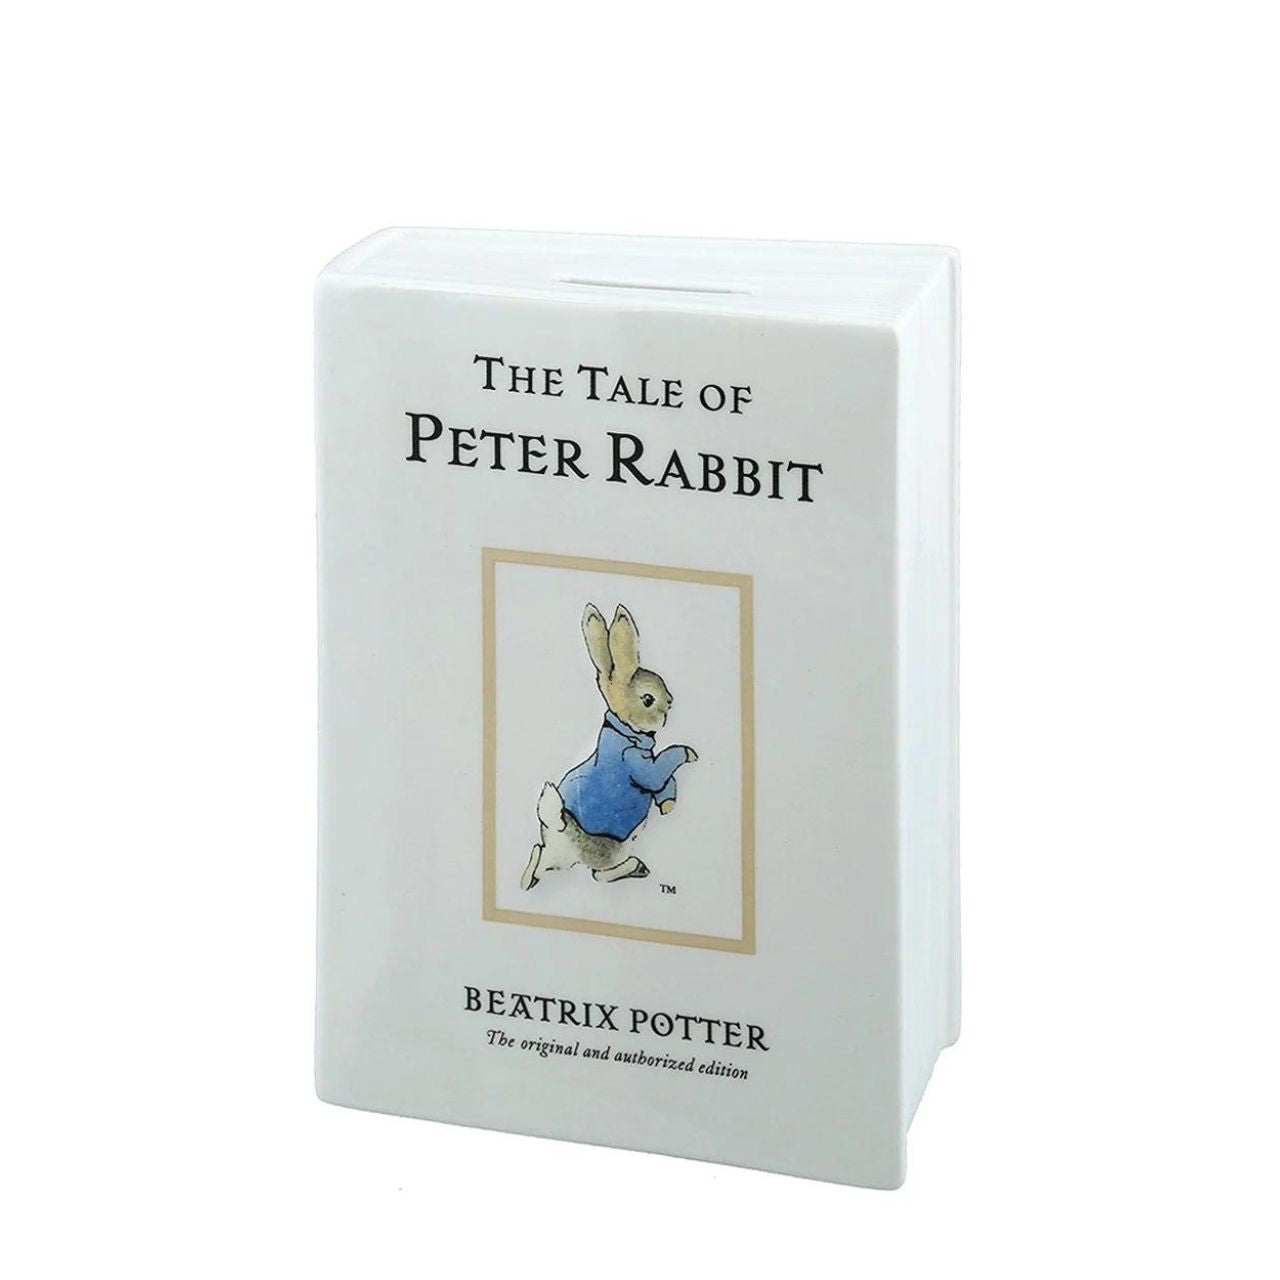 Beatrix Potter The Tale of Peter Rabbit Money Bank  Peter Rabbit gives you the perfect way for saving the pennies. This money bank has been lovely created, turning the classic Tale of Peter Rabbit book, into the shape and design of a money bank. An adorable gift for a new born or small child to celebrate their Christening or to give as a keepsake.